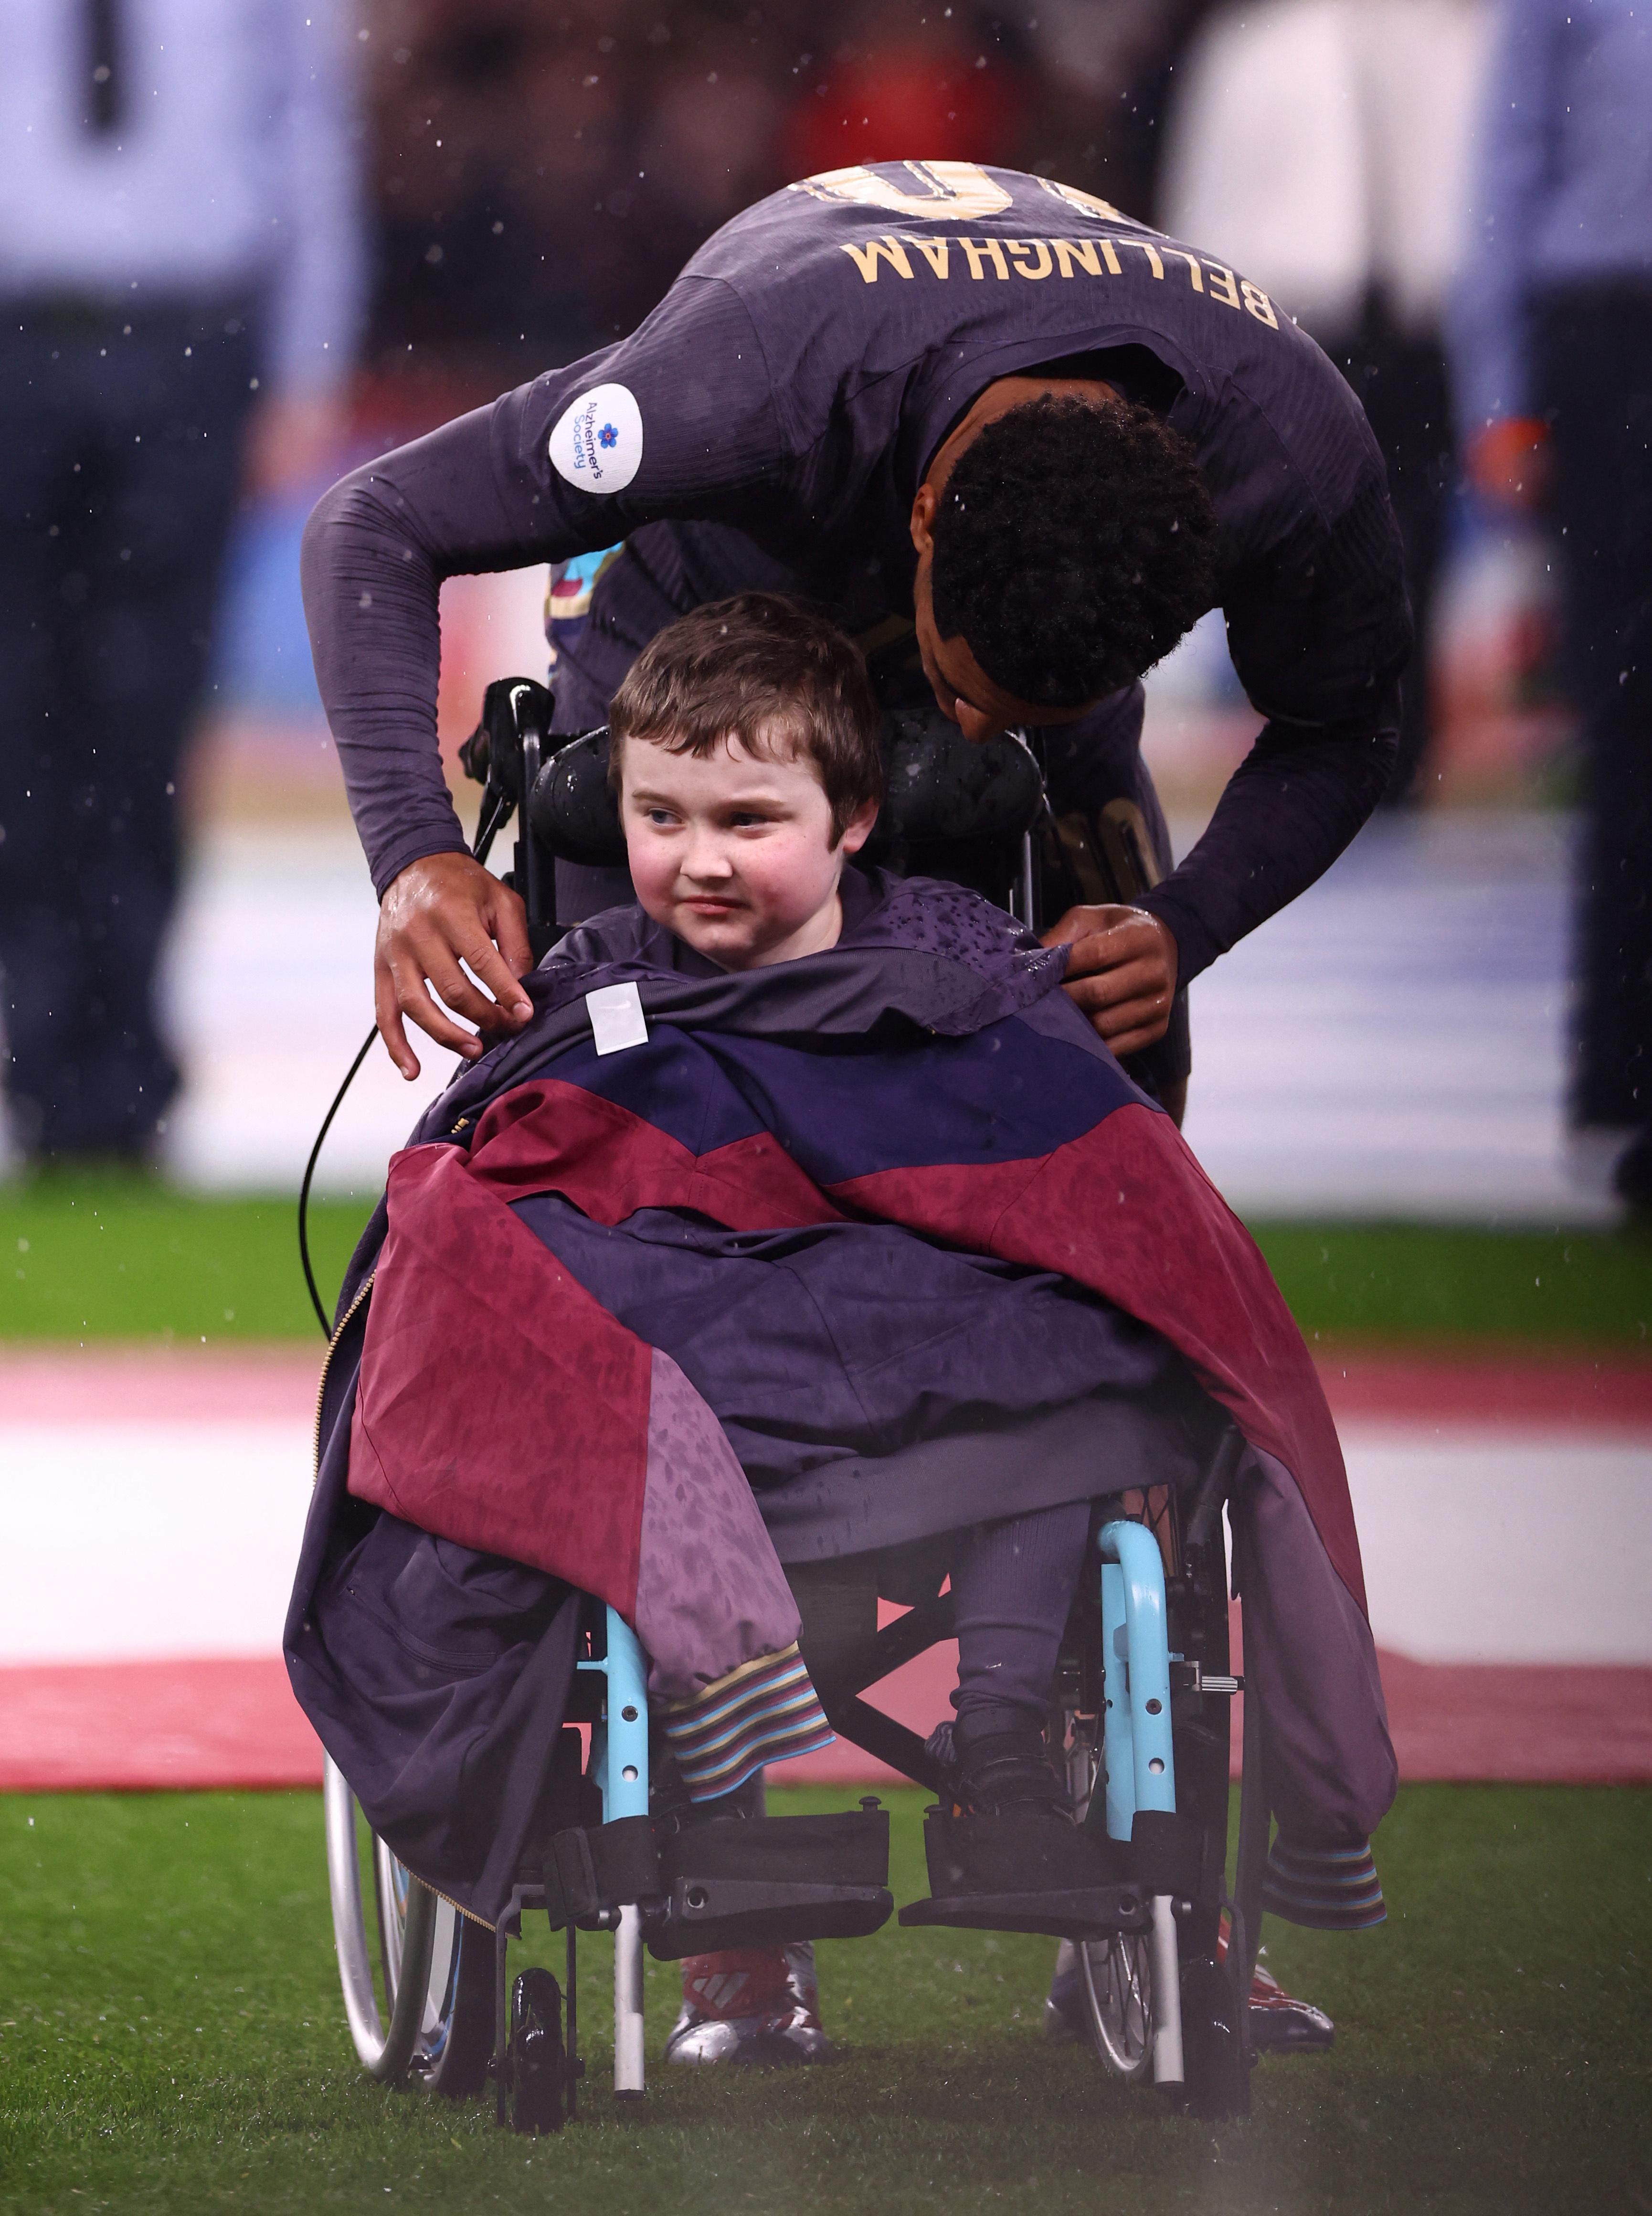 Touching moment as England star Bellingham gives his tracksuit top to  mascot in wheelchair as it rains at Wembley | The Sun